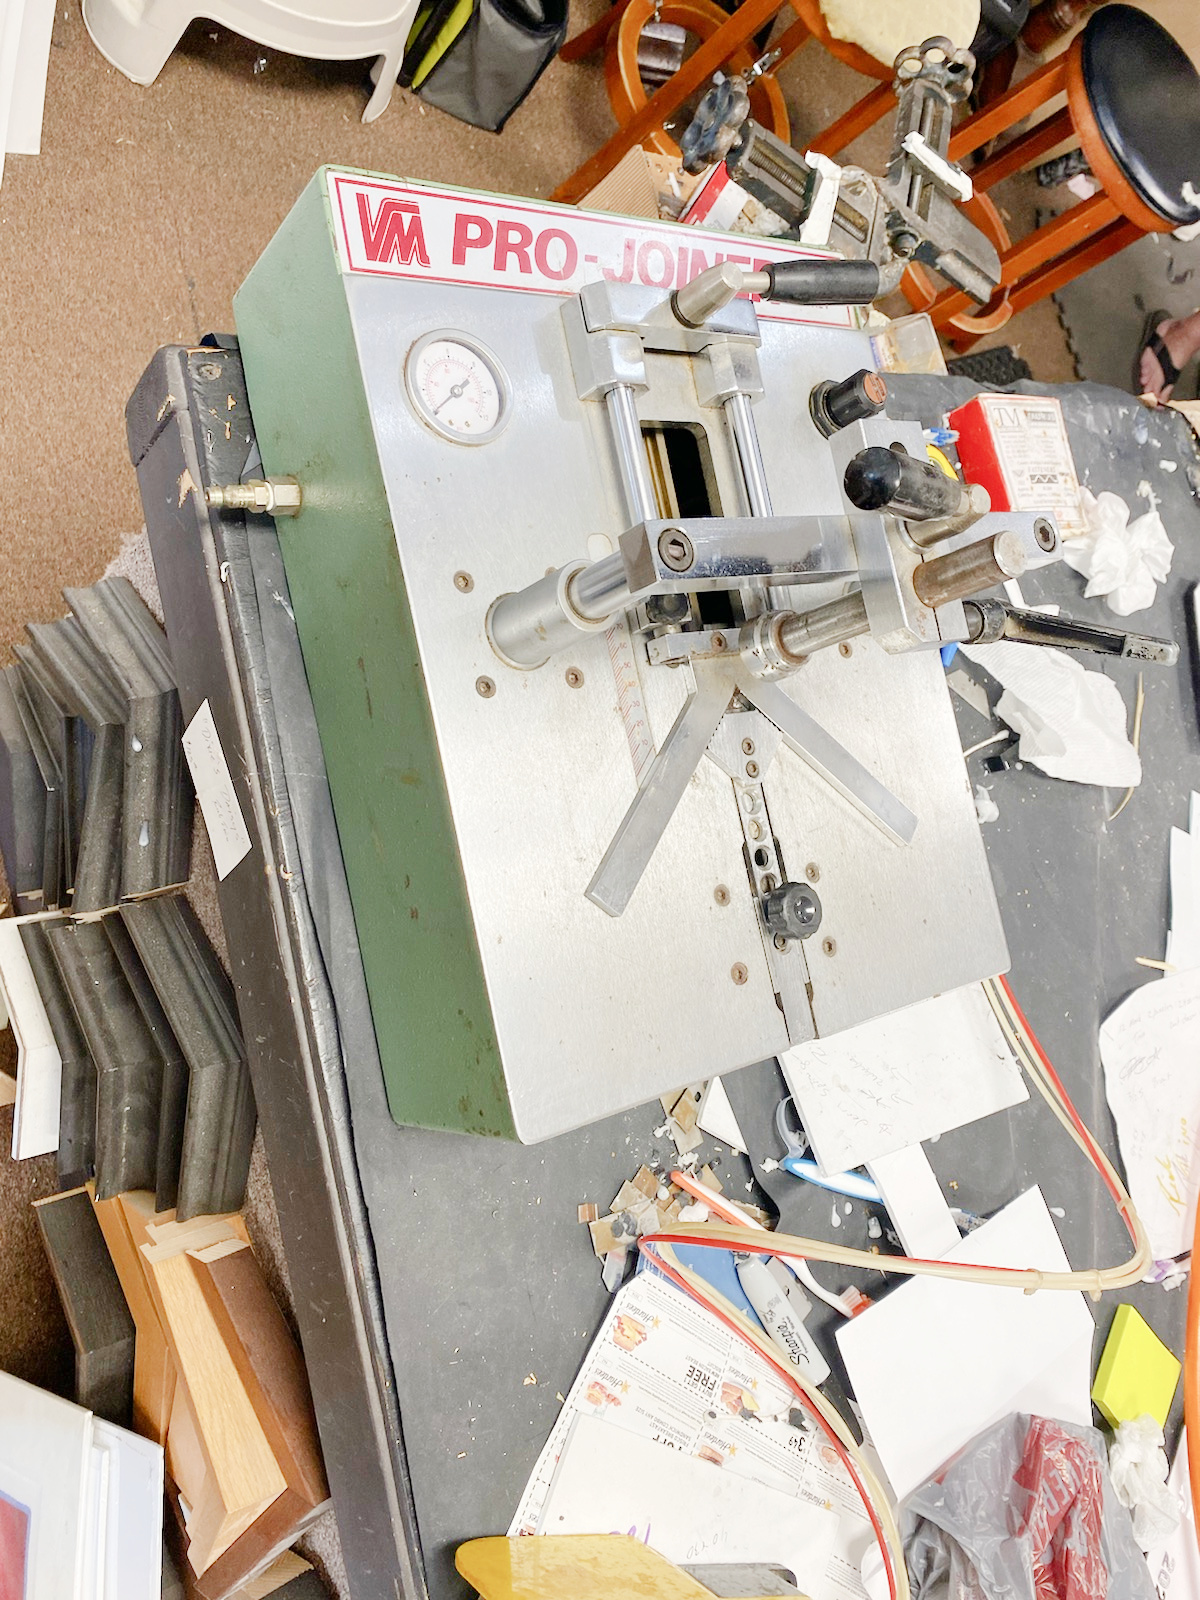 Equipment Lot: VM Pro Joiner Underpinner, Seal Masterpiece 500T Press & P200 Strapping Machine (Used) Item # UE-021022A (Alabama)